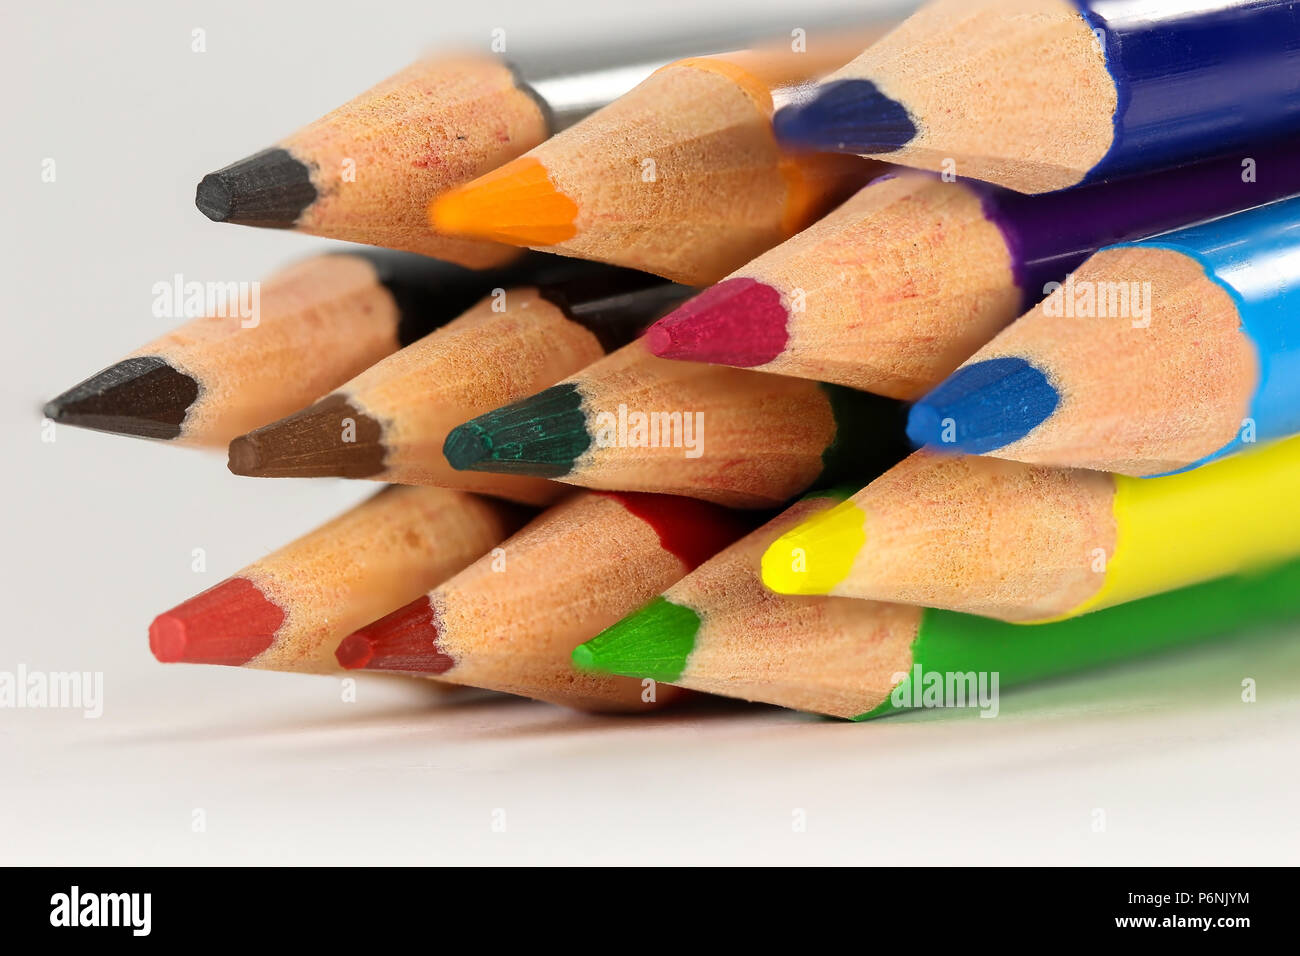 Colored pencils in macro closeup. Colored pencils are related to education, the arts and the painting of drawings. Stock Photo